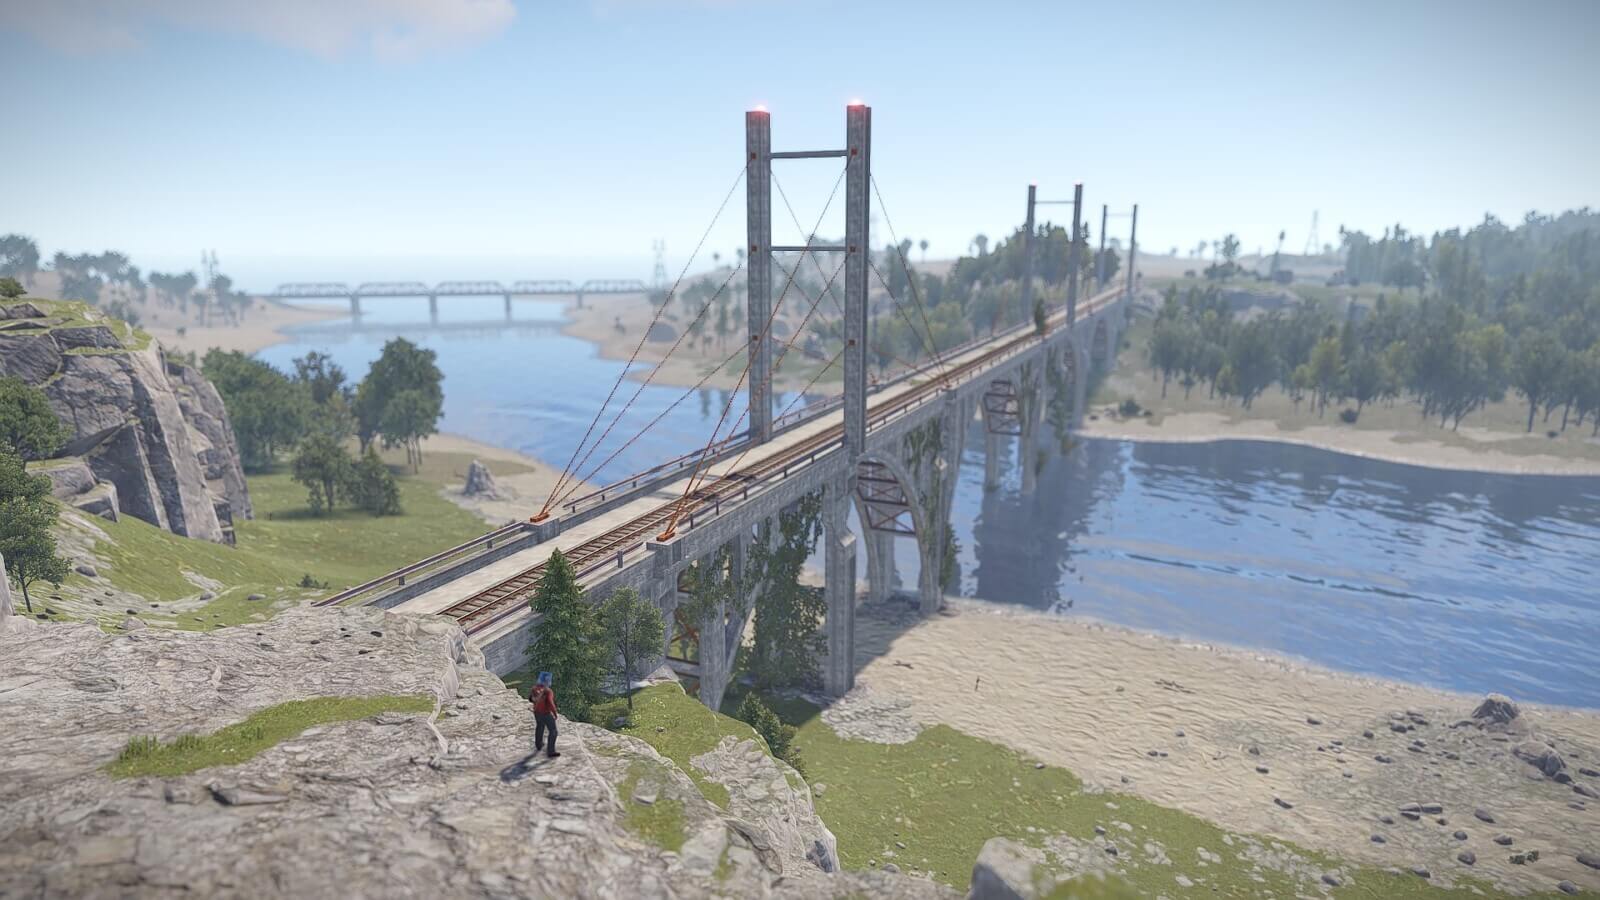 A massive bridge on observer island going over the large river cutting into the map